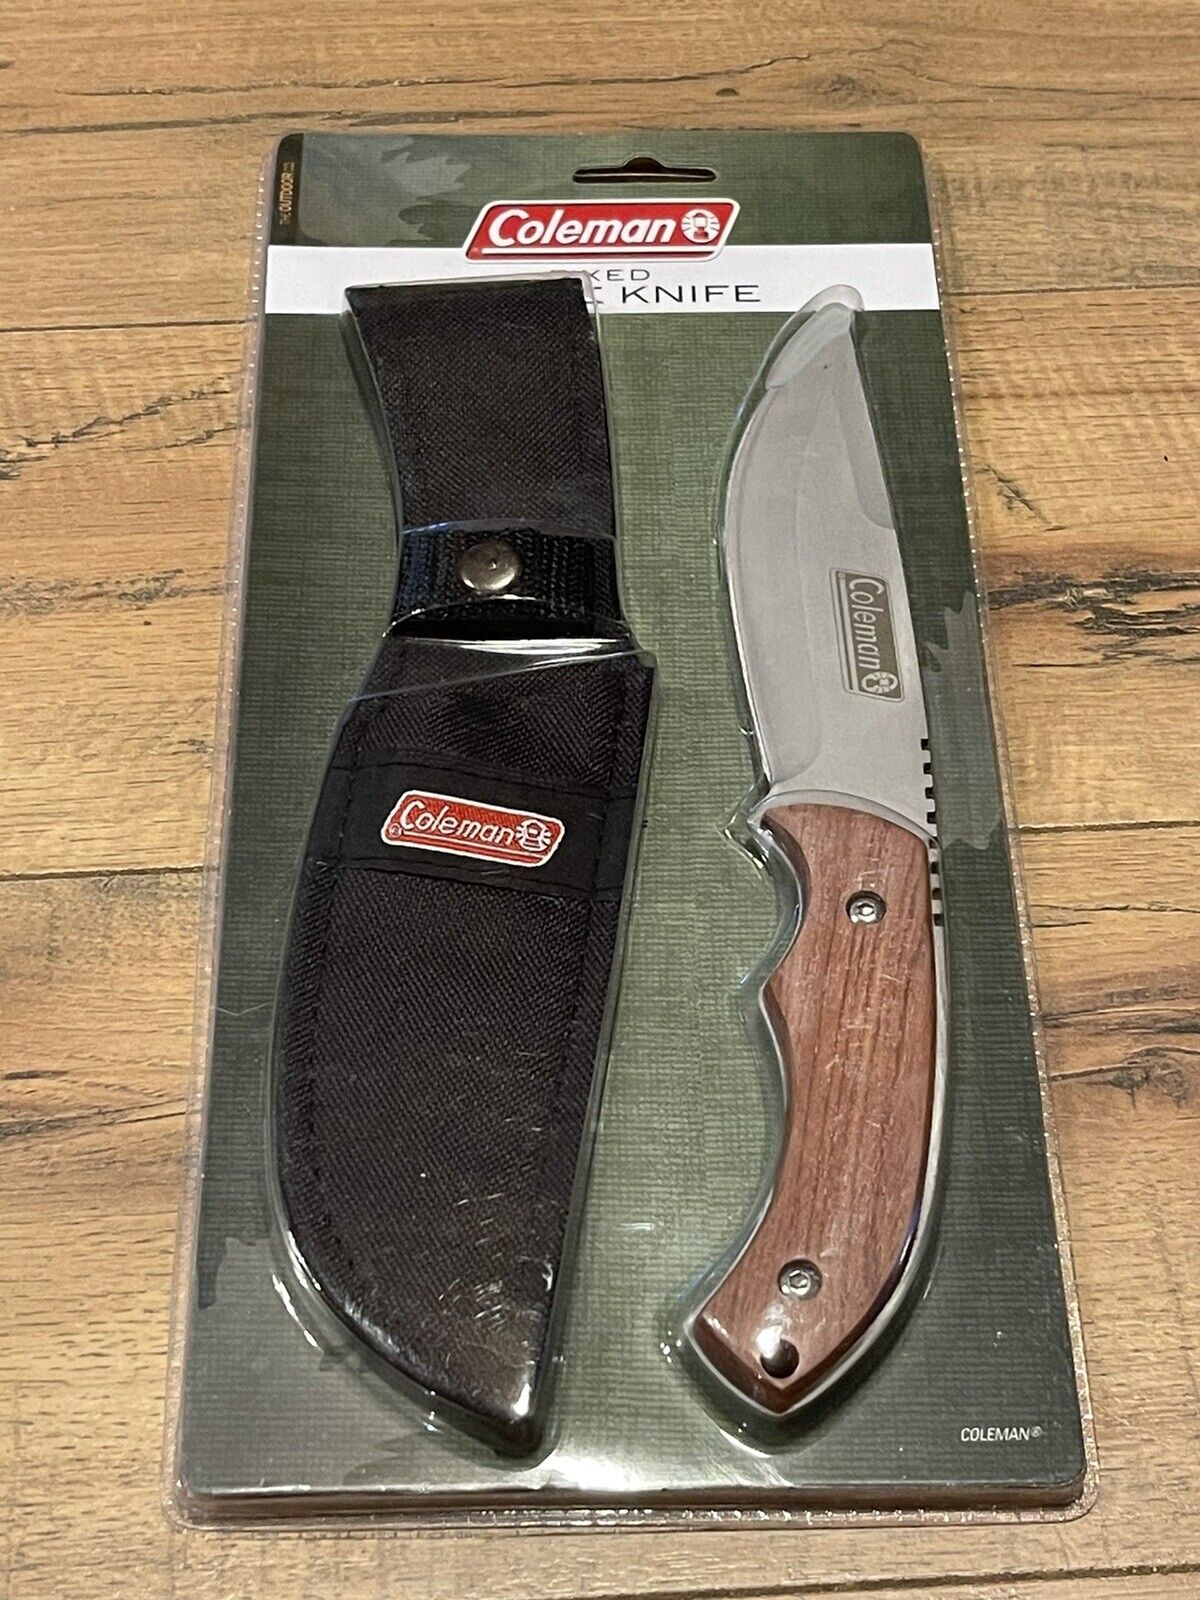 NEW ~ Coleman Fixed Blade Knife With Sheath 5in Blade Camping Survival ~ NEW